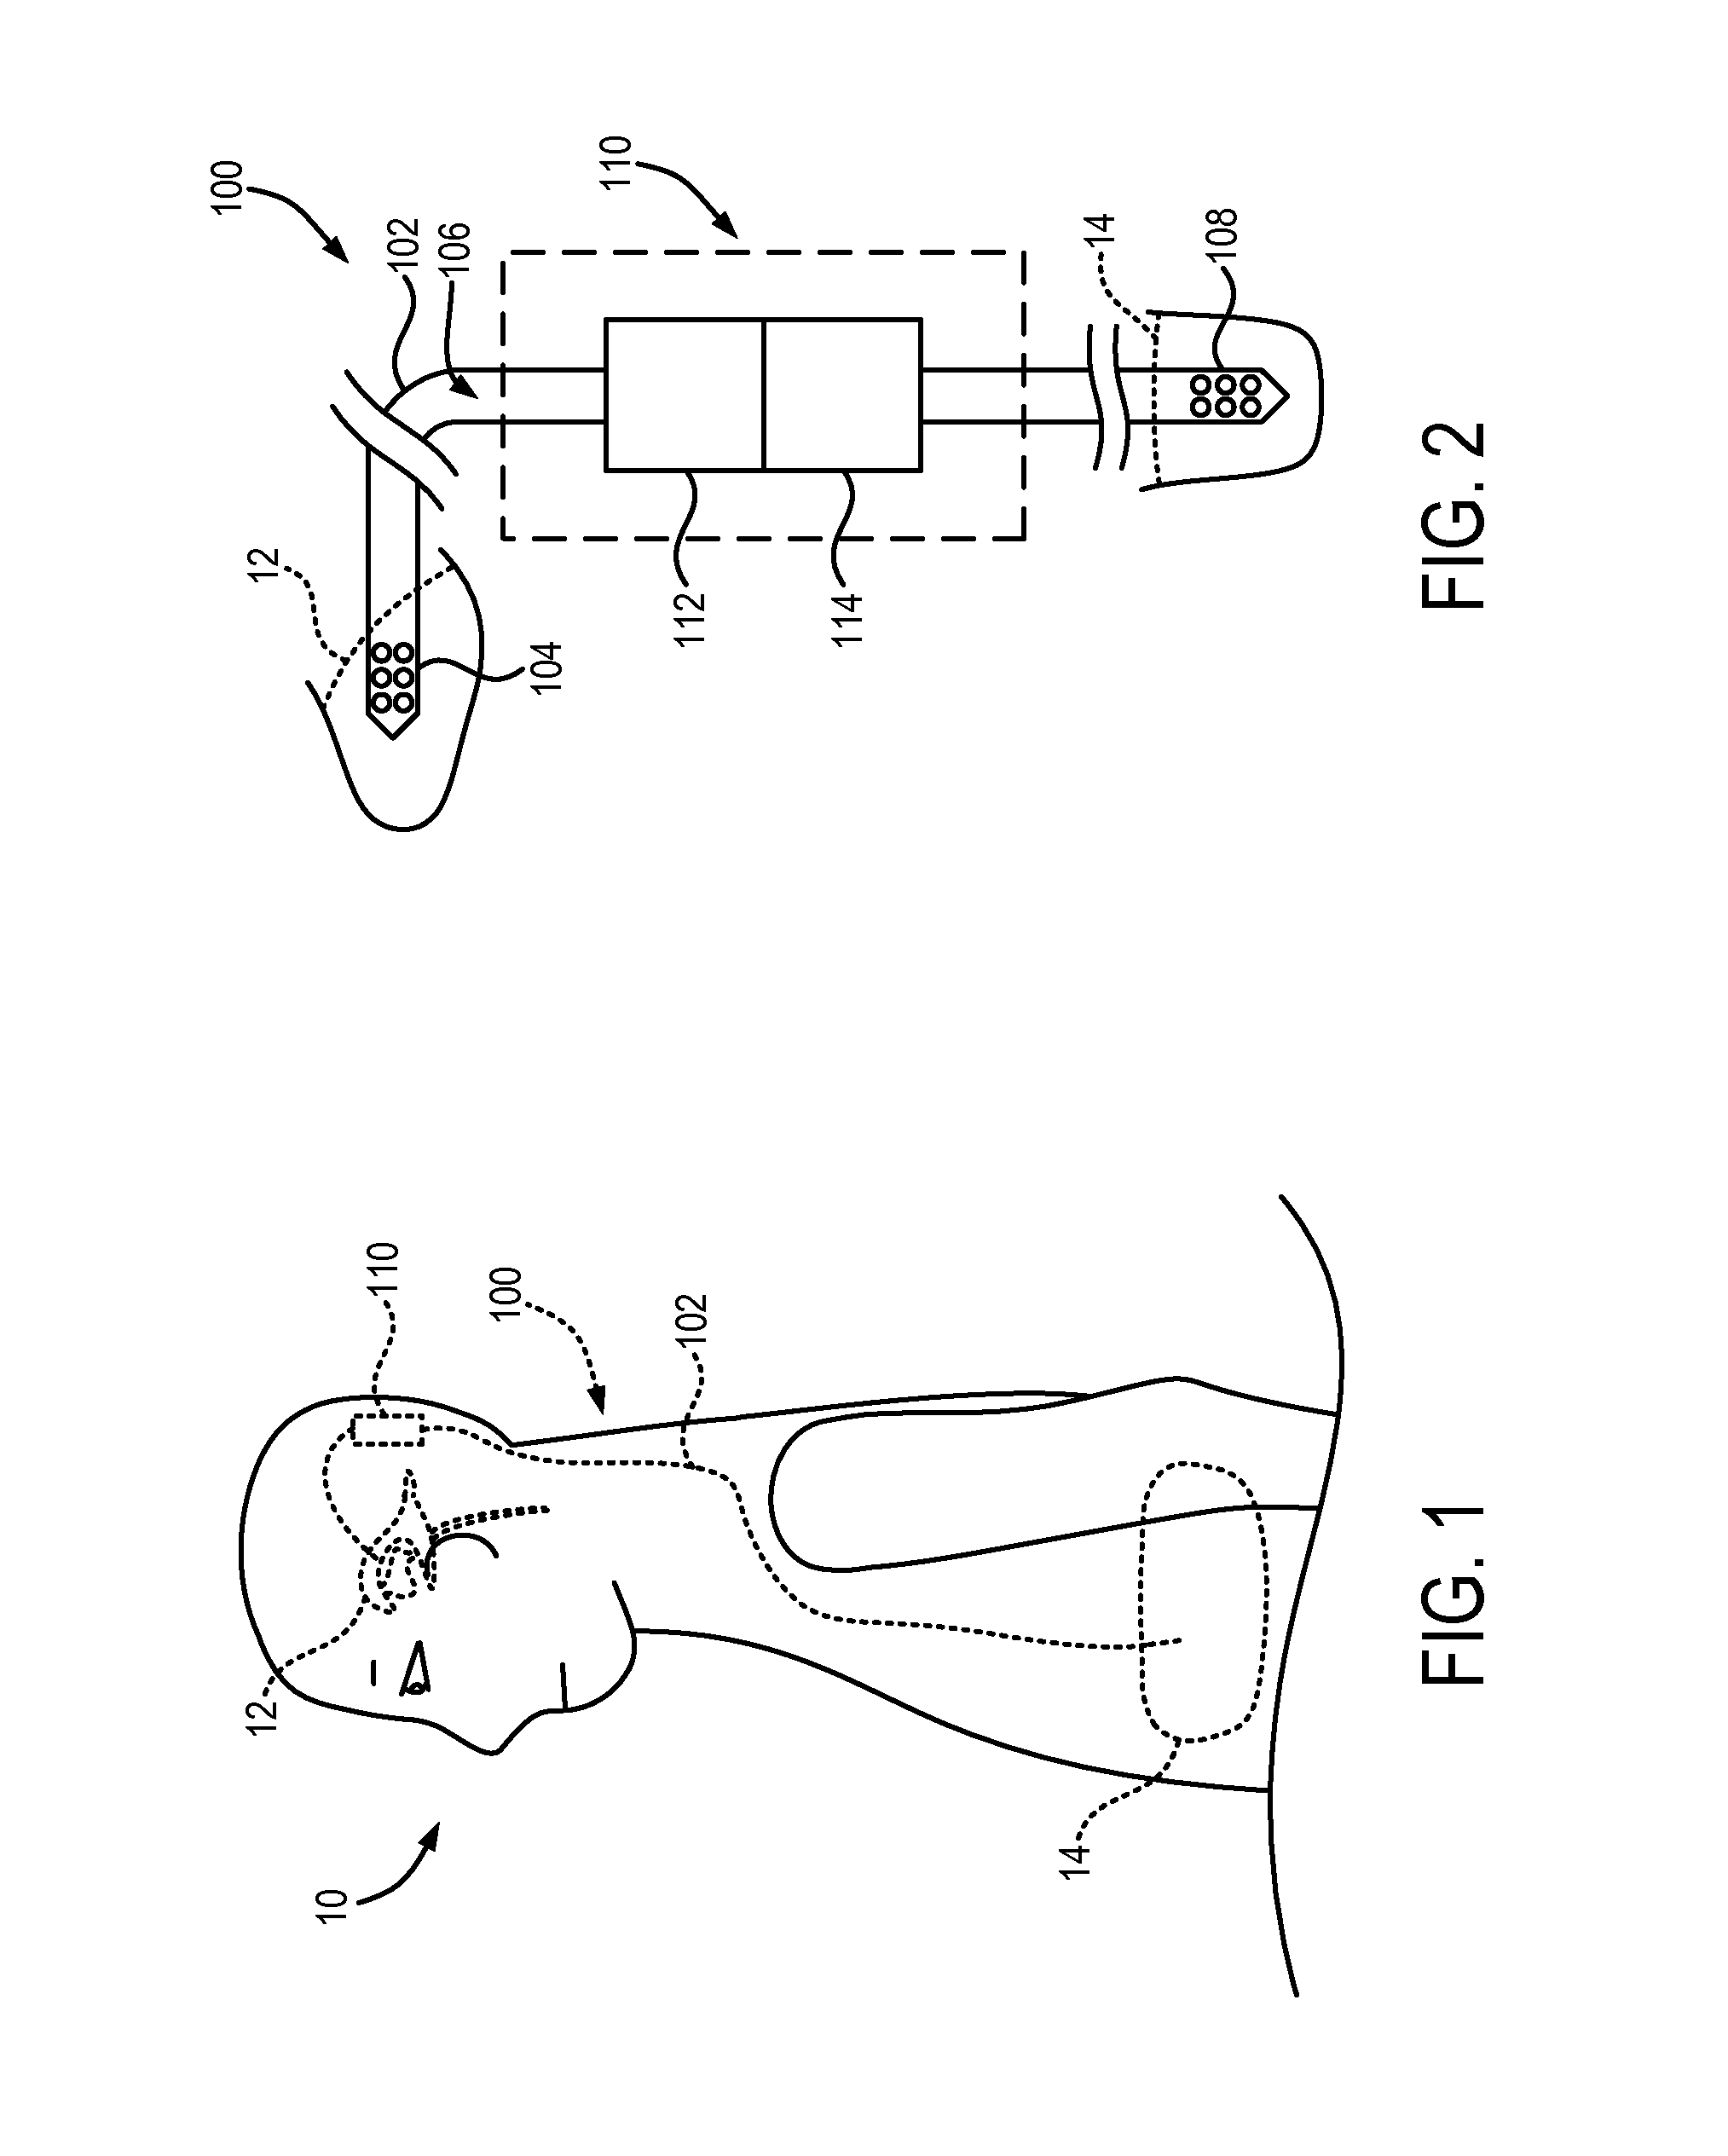 Systems and methods for controlling cerebrospinal fluid in a subject's ventricular system